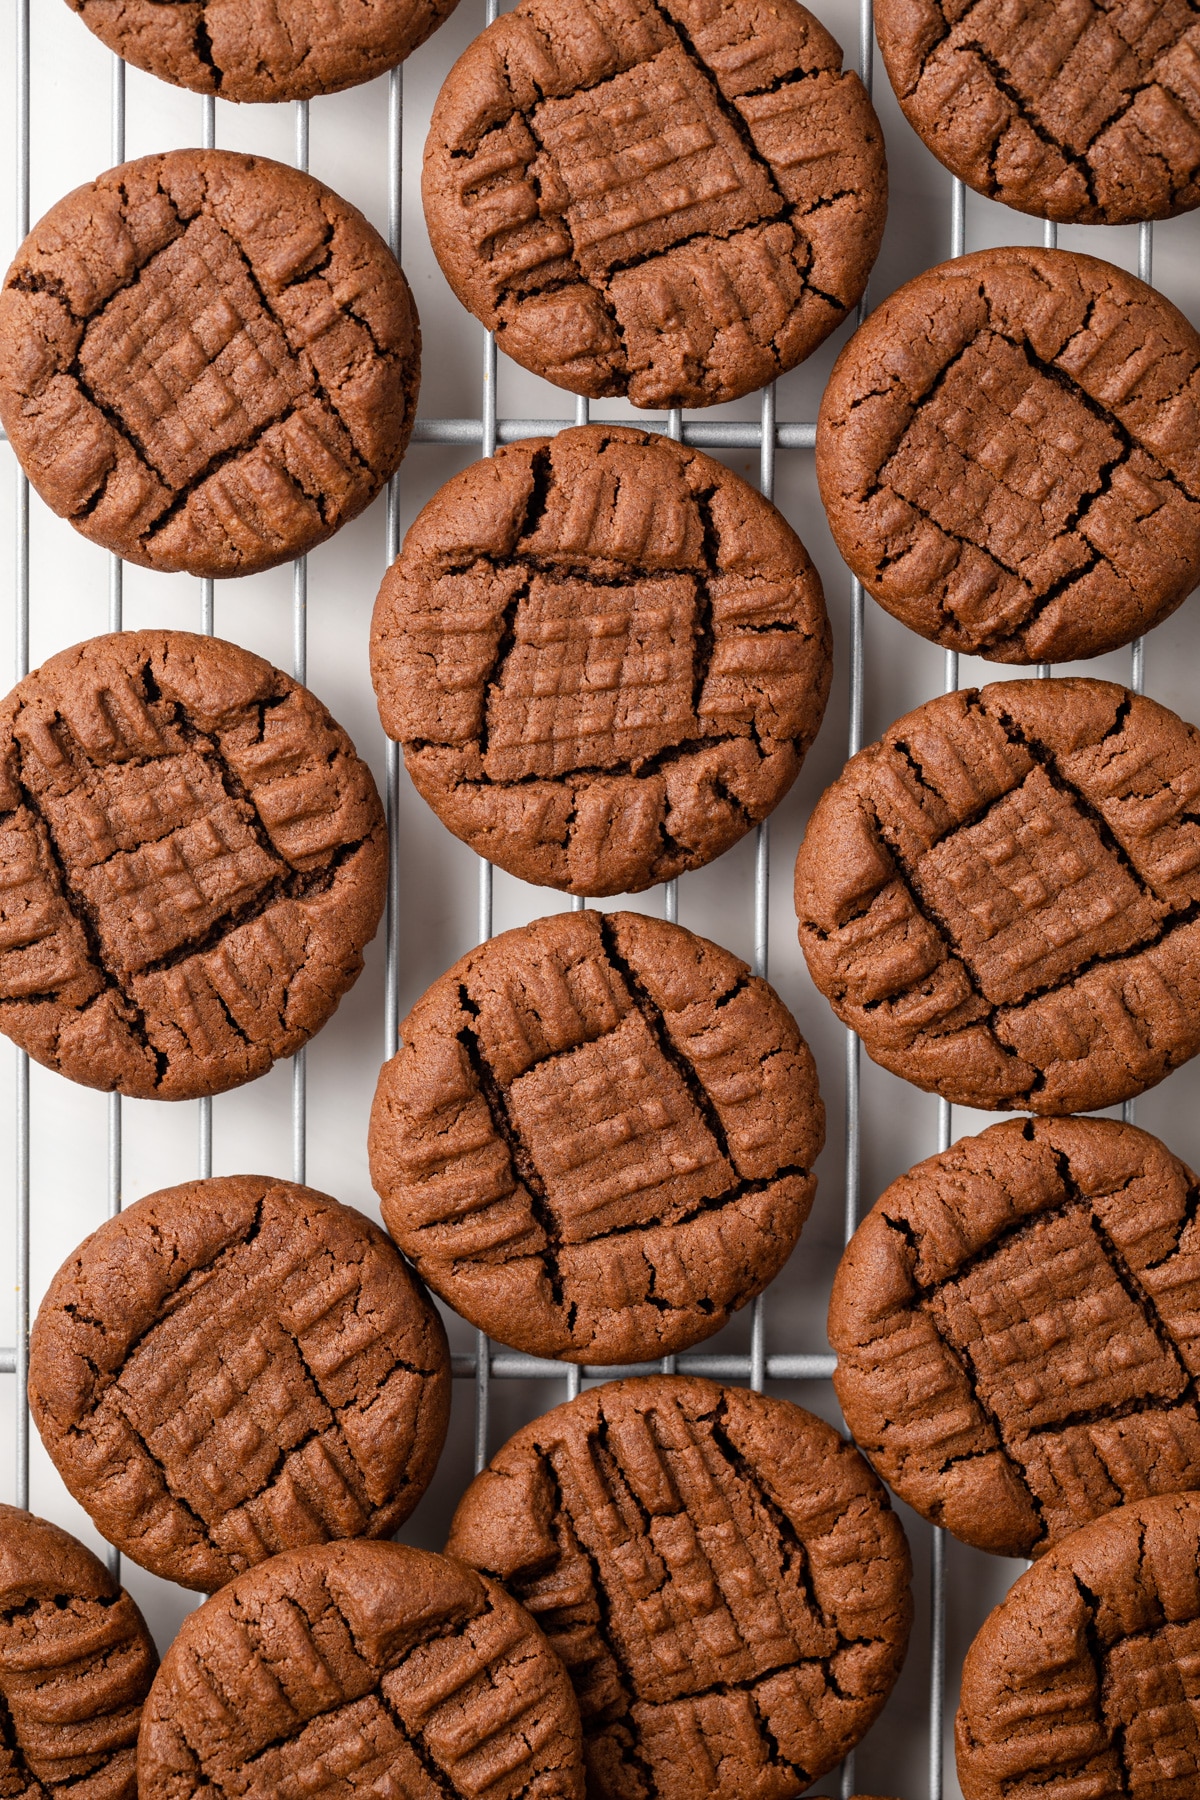 Chocolate peanut butter cookies on wire rack.